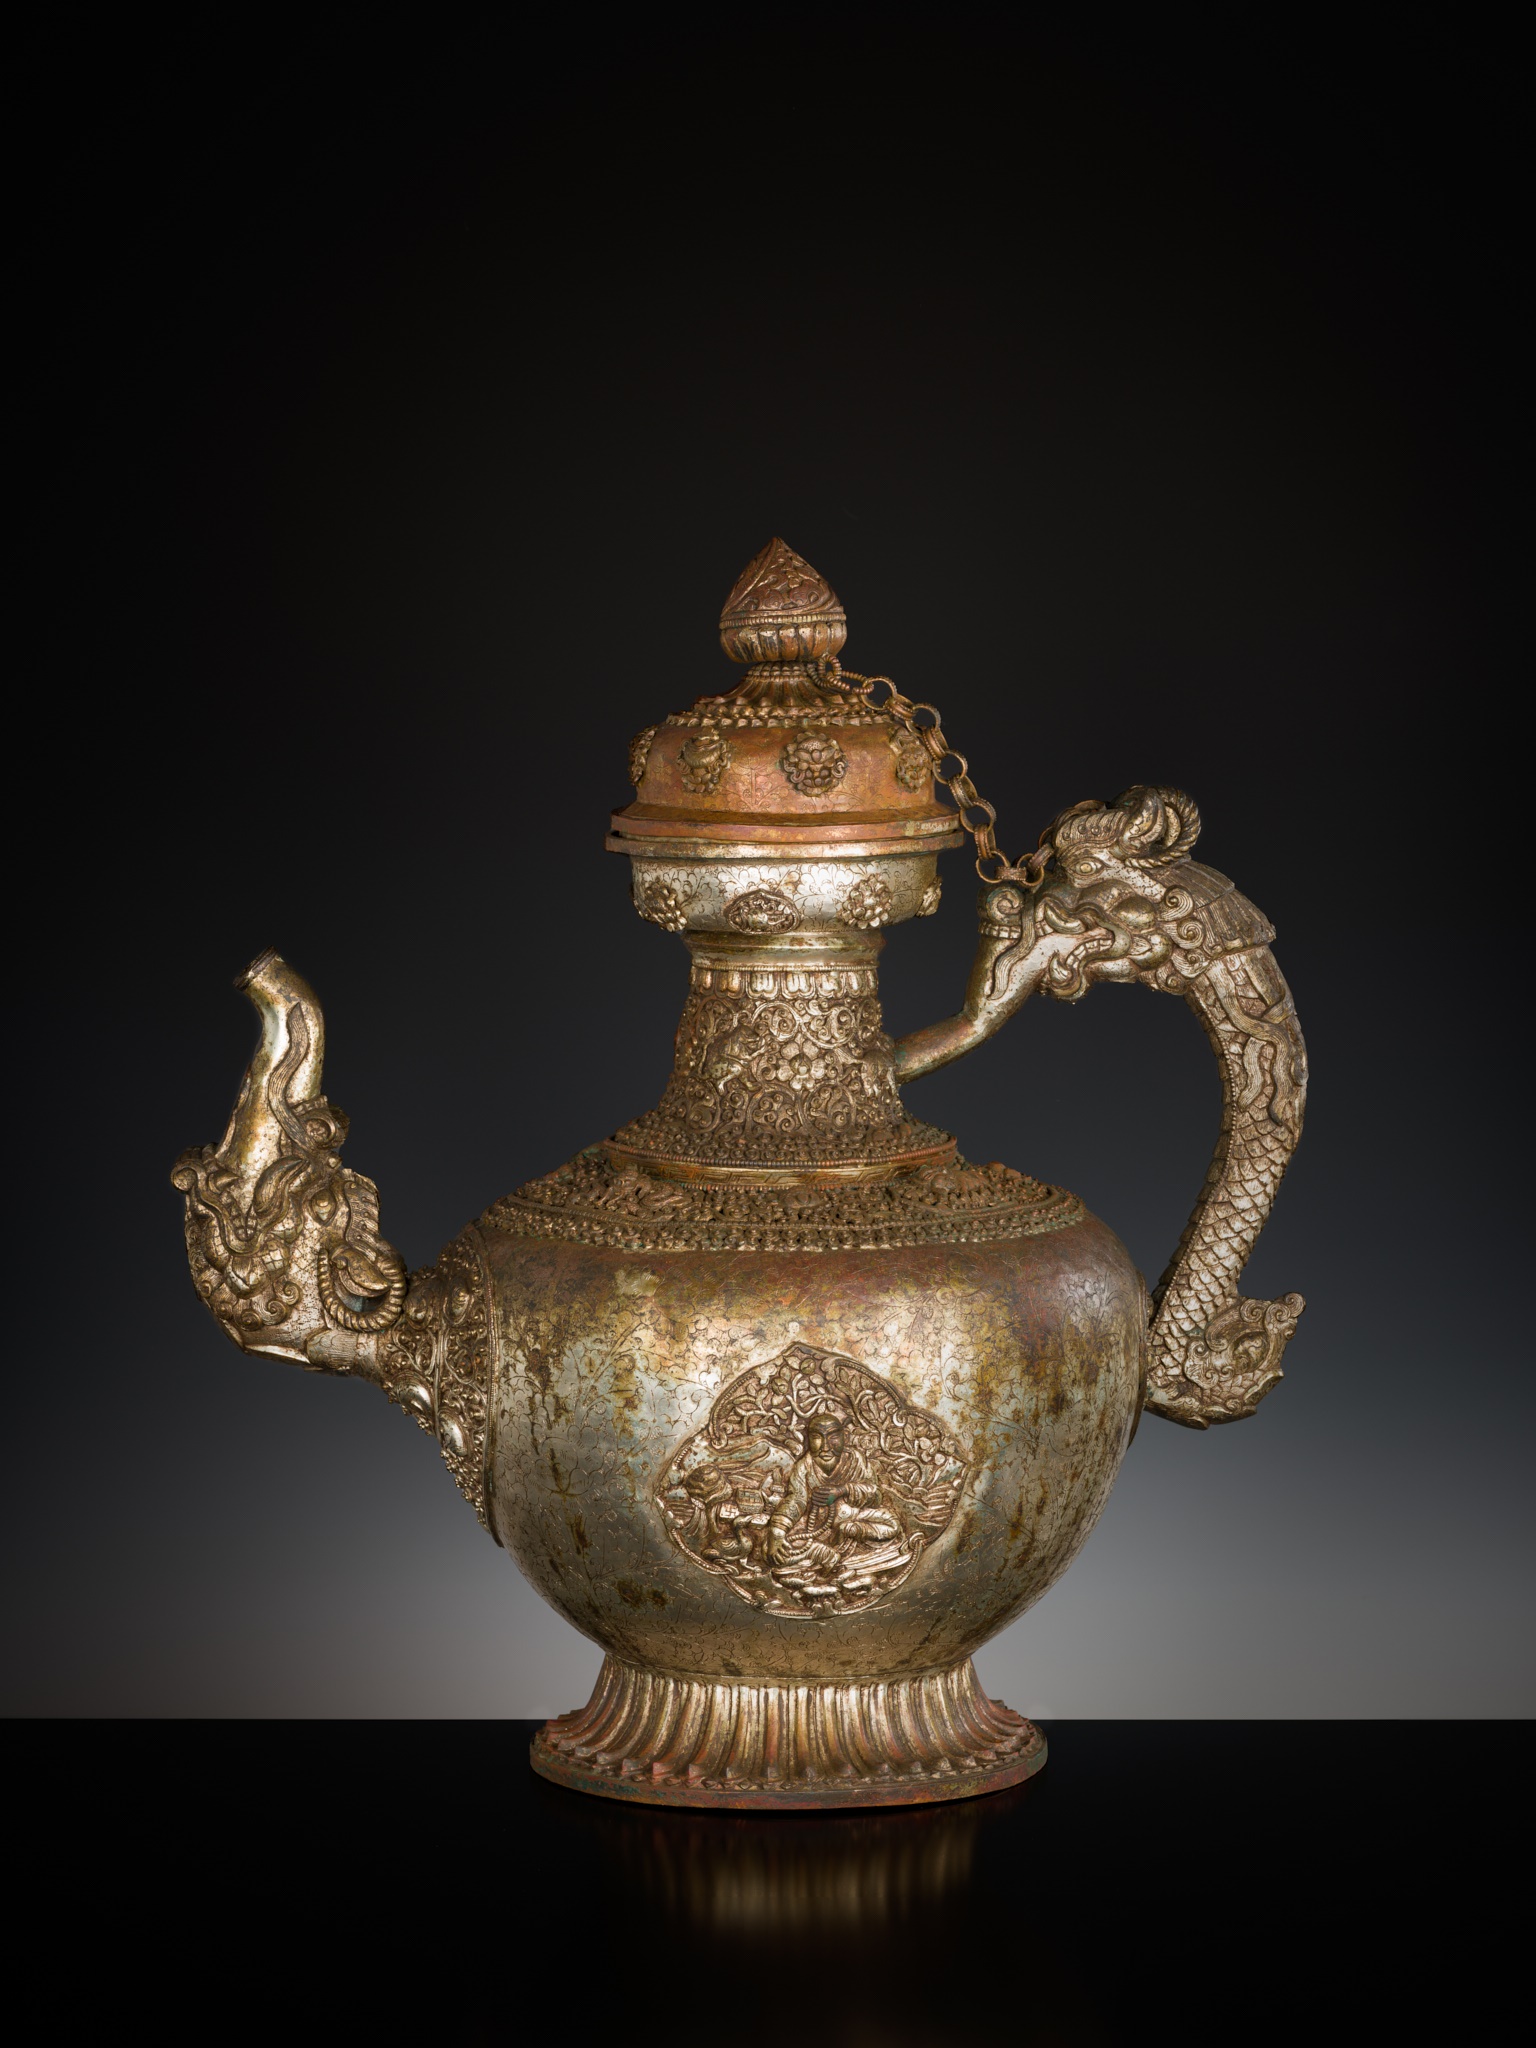 A MASSIVE SILVERED-COPPER RITUAL TEAPOT AND COVER, TIBET, 19TH CENTURY - Image 10 of 15